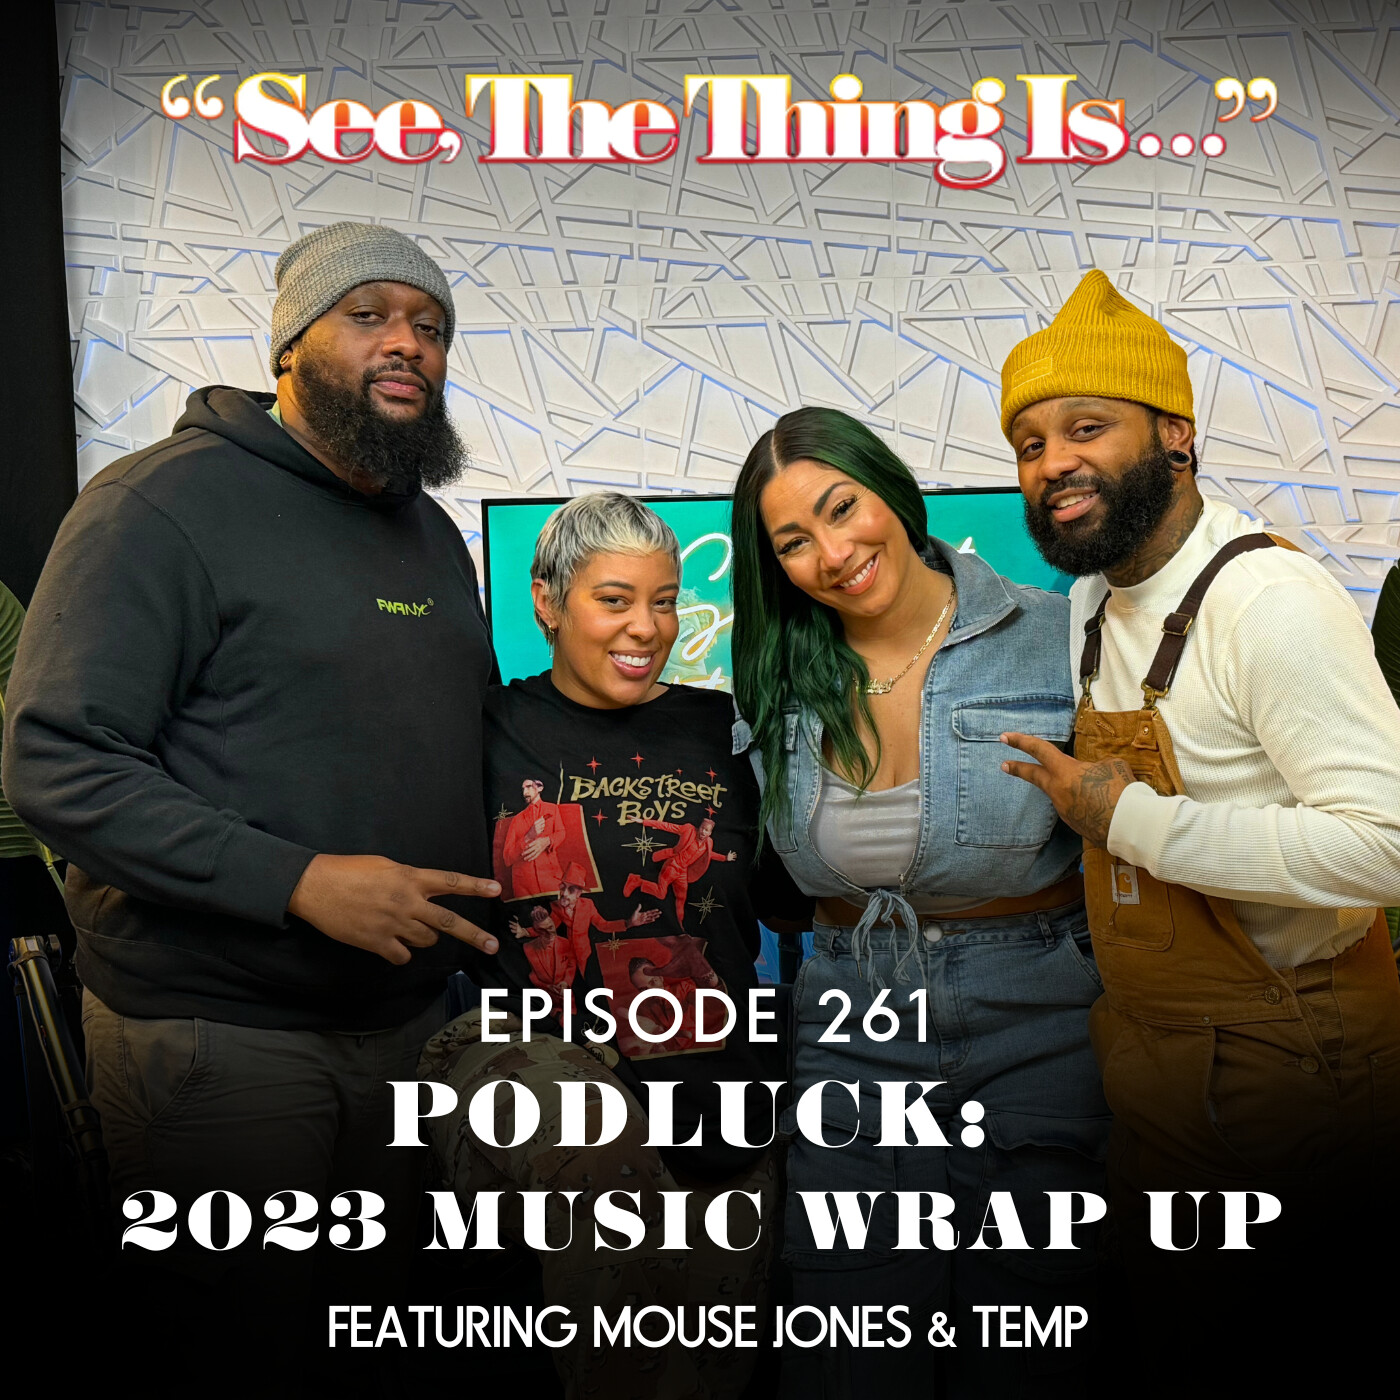 Podluck 2023: Music Wrap up Feat. Mouse Jones and Temp